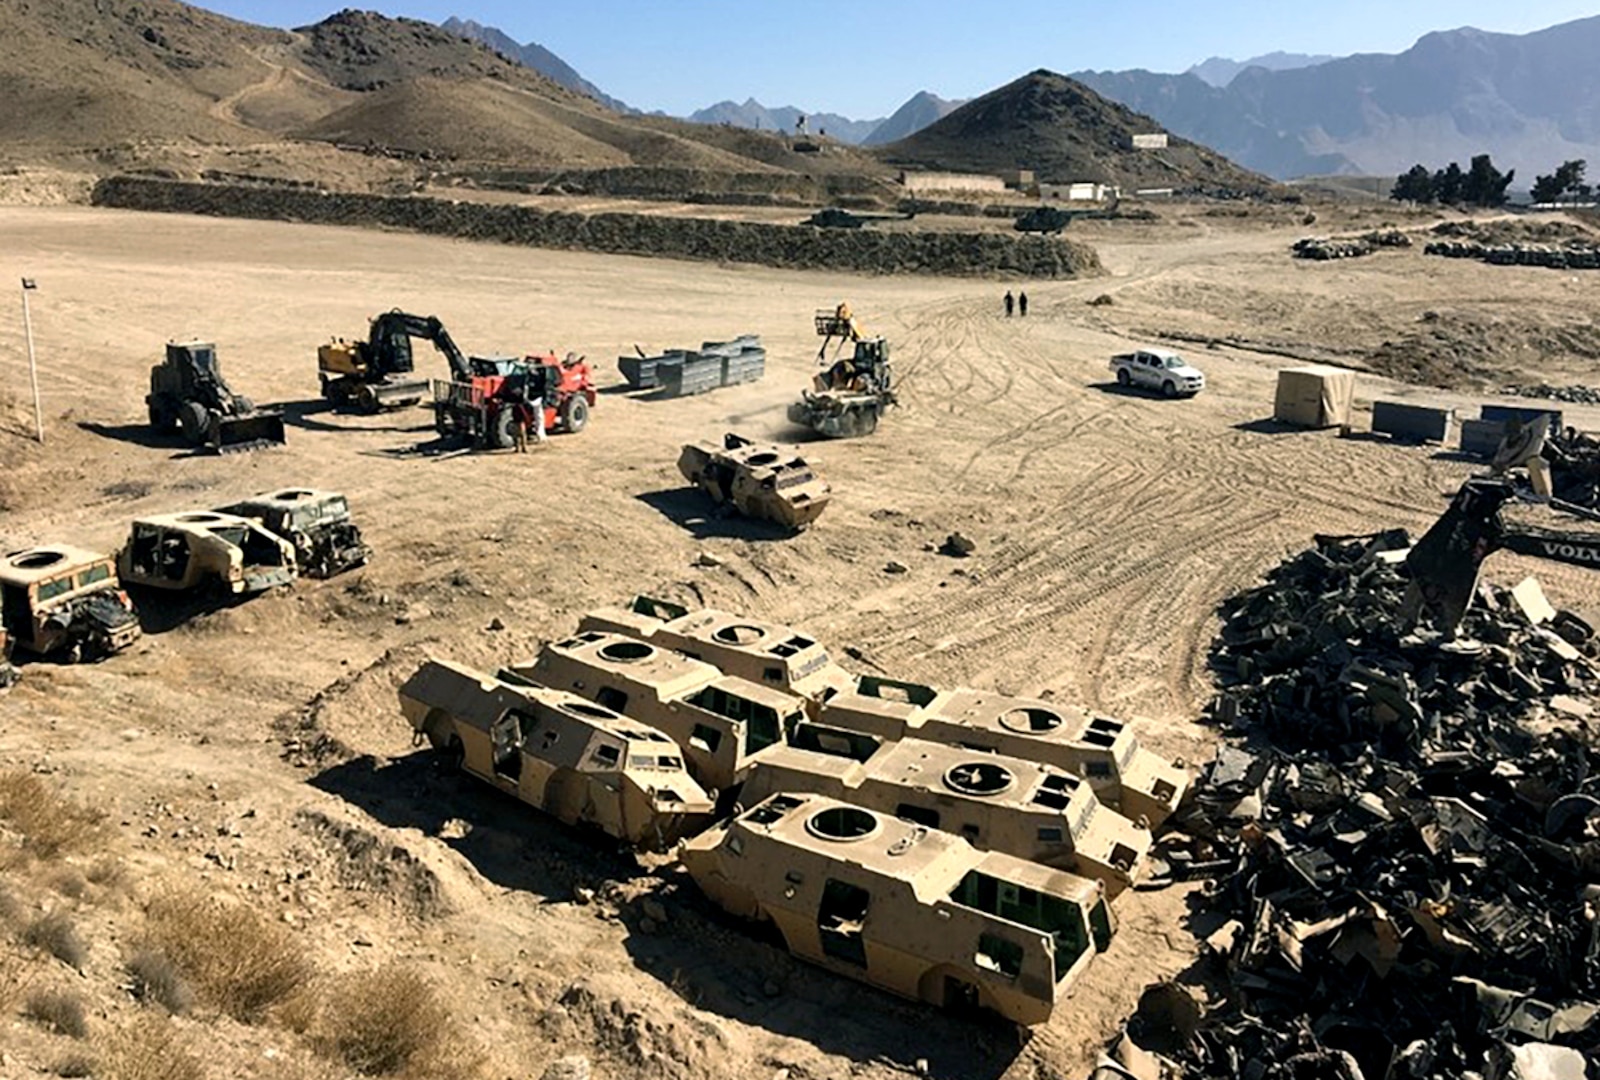 Members of the DLA Disposition Services team in Afghanistan proved they’re willing to leave their comfort zone to support military customers when the team traveled to Camp Moorhead to conduct demilitarization of gear designated to become scrap. The demilitarization process normally takes place at one of four DLA Disposition facilities still in existence in Afghanistan.